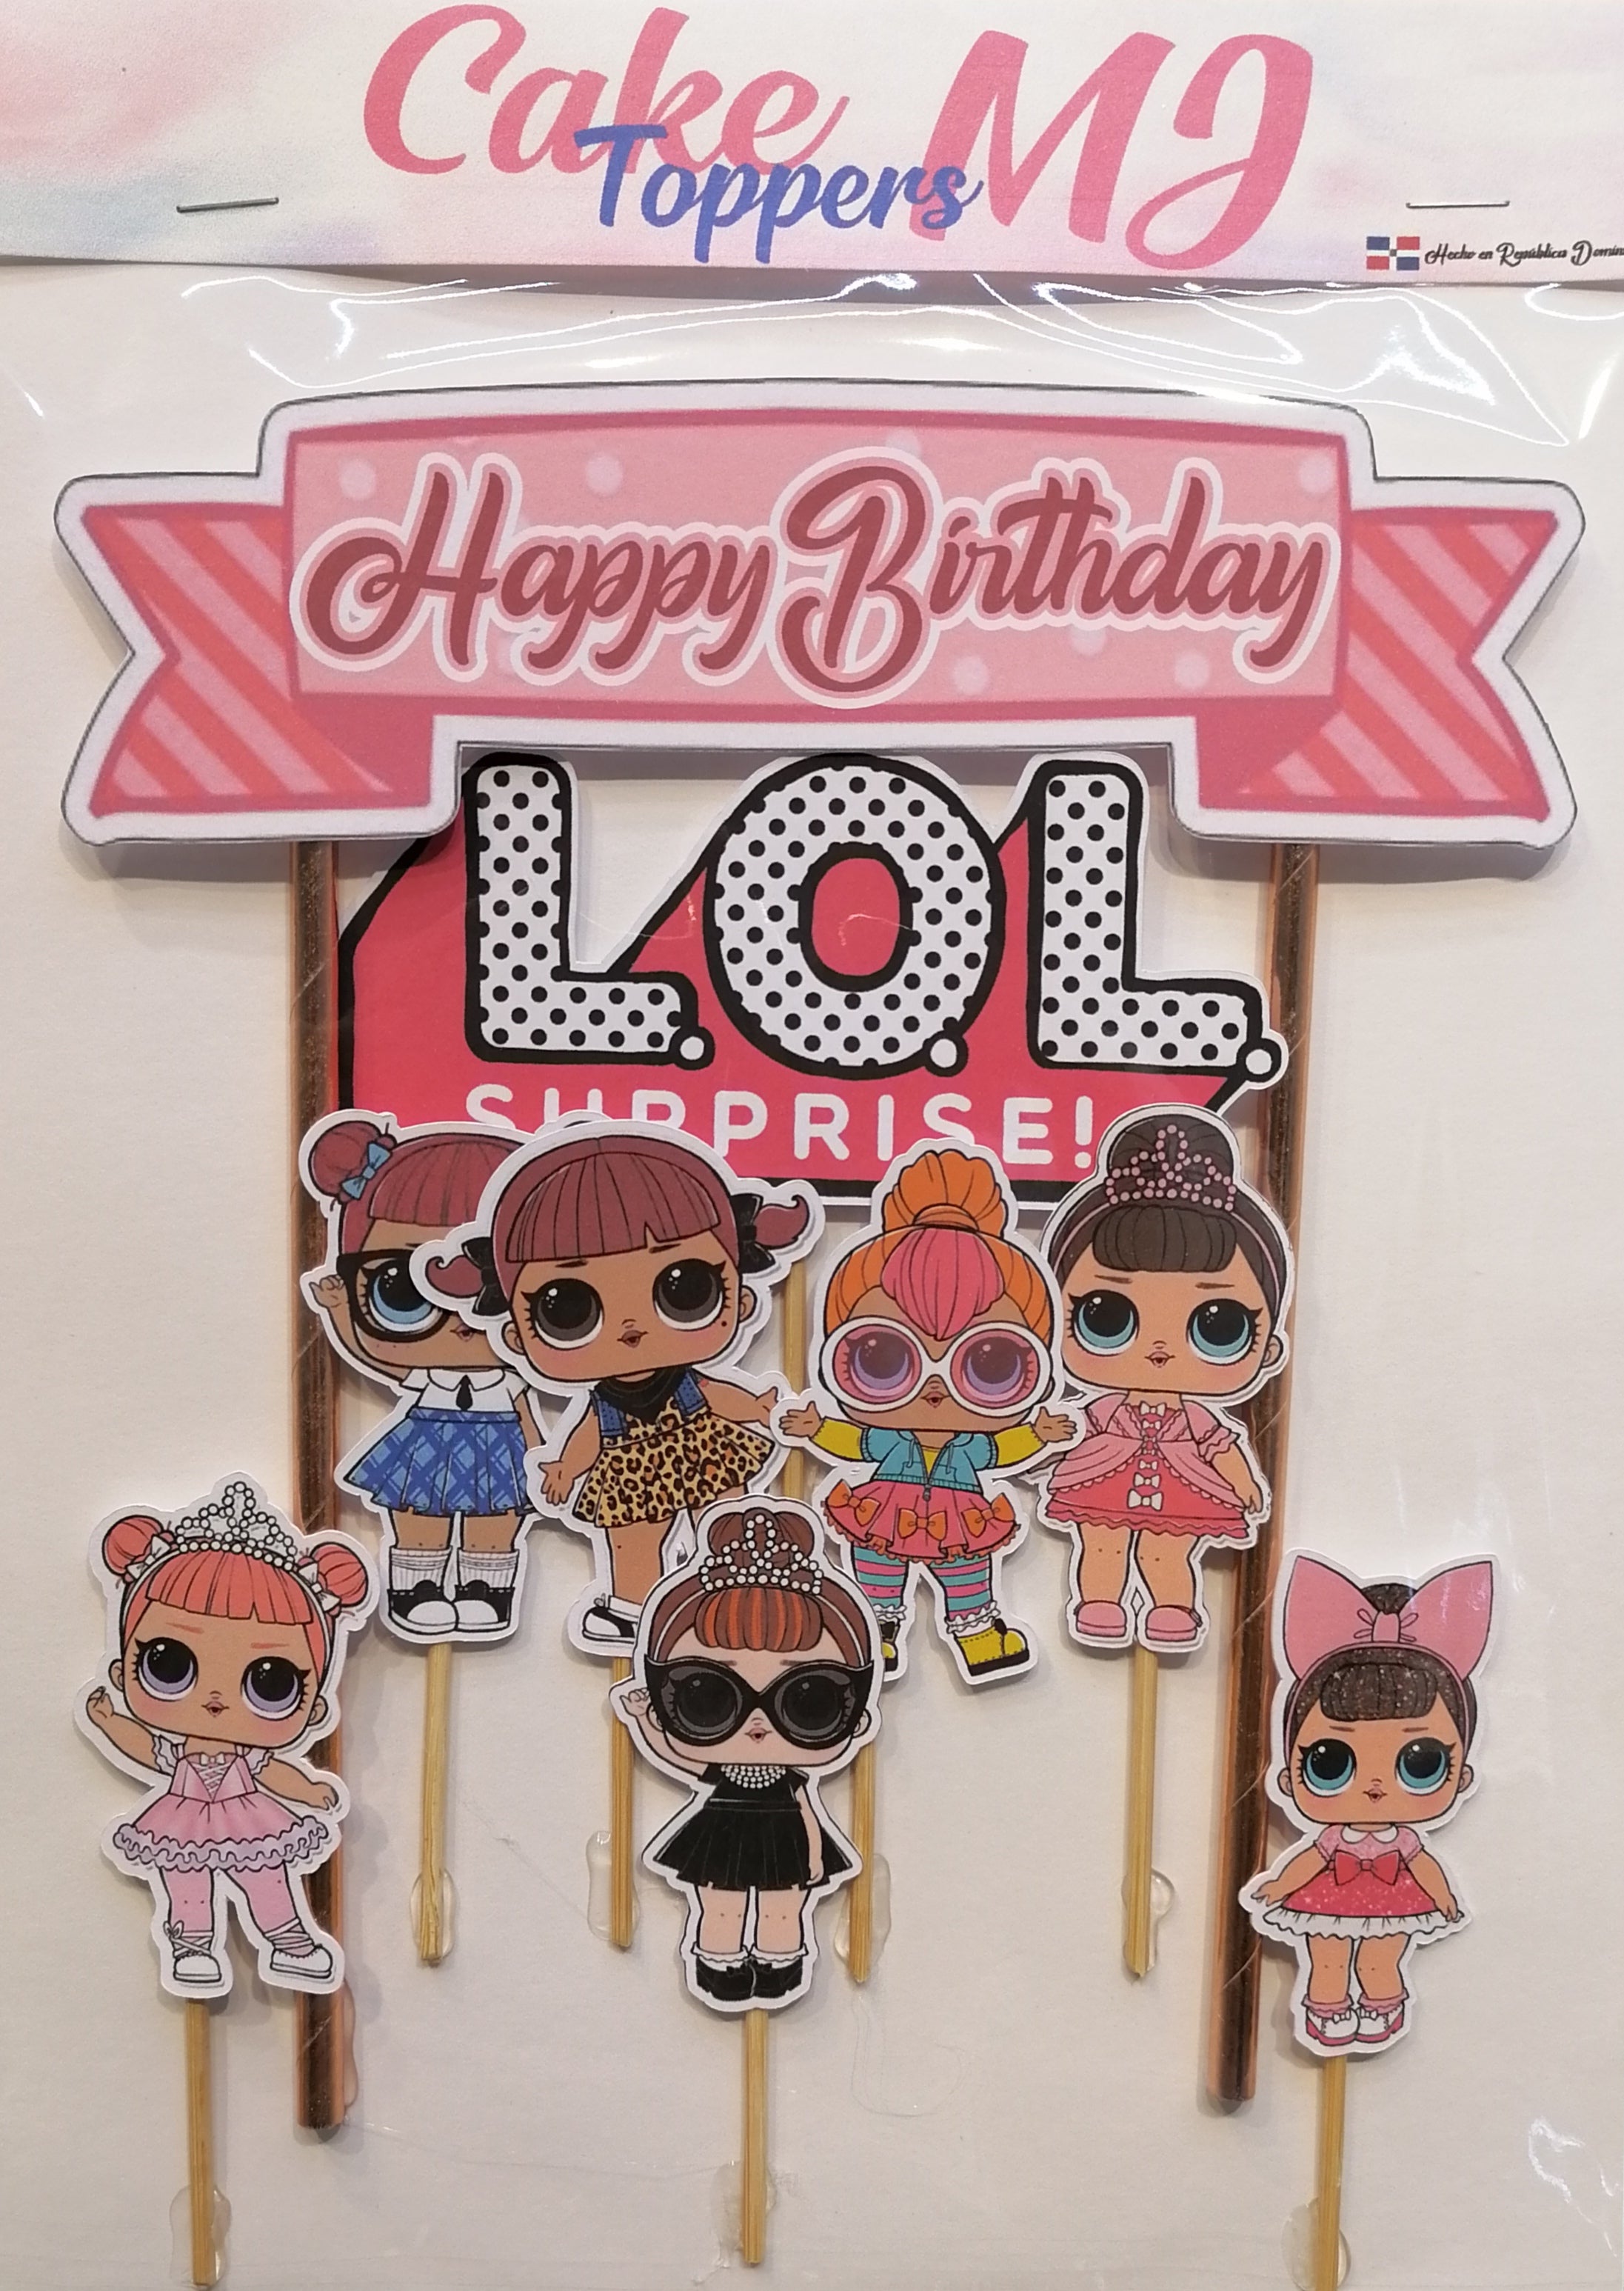 LOL Surprise Cake topper – Cake Toppers MJ